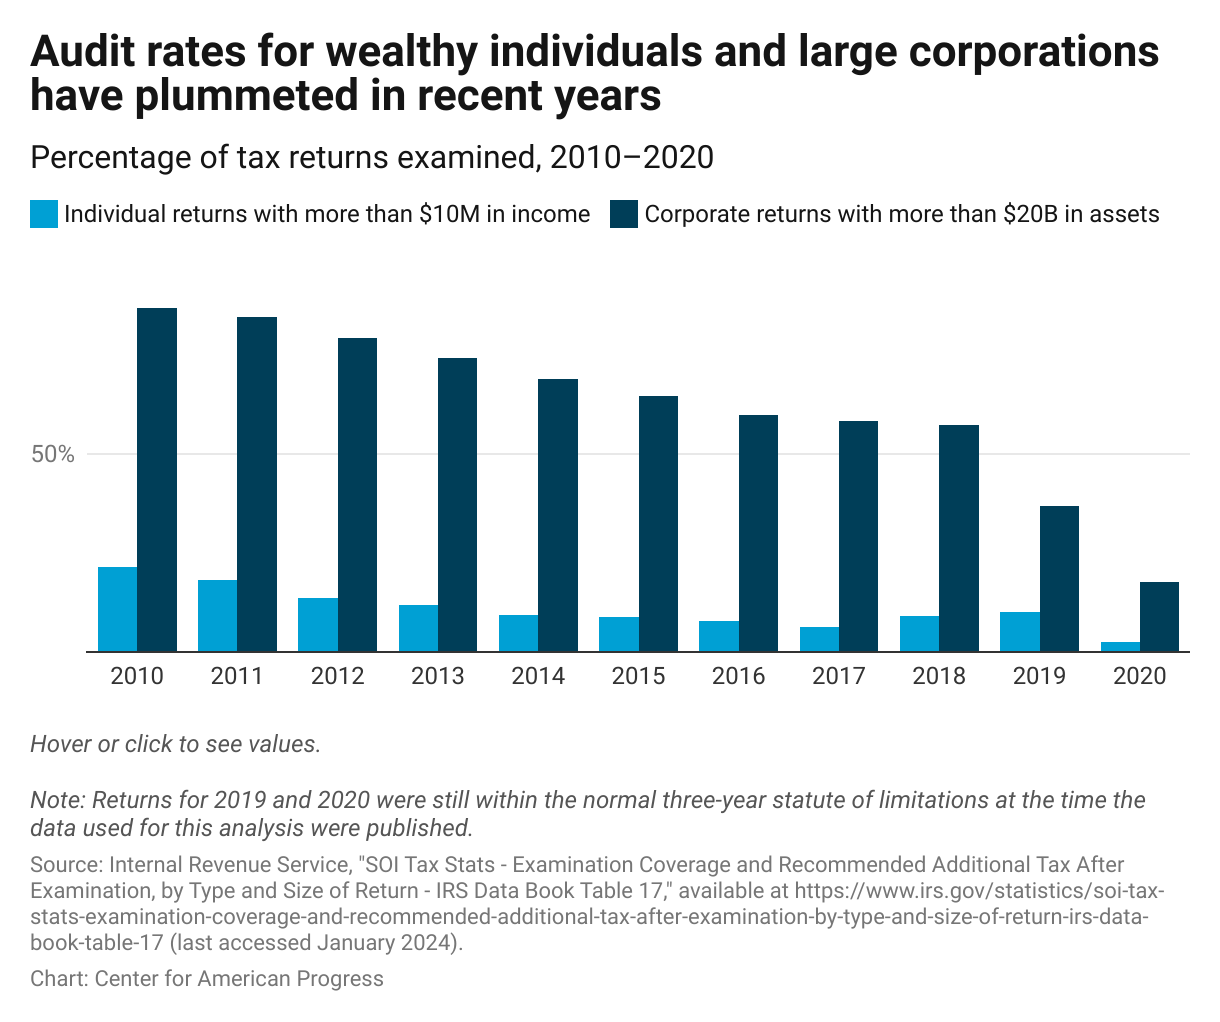 Column chart showing the of percentage of tax returns examined, with audit rates for individual returns more than $10 million in income and corporate returns more than $20 billion in assets declined between 2010 and 2020.